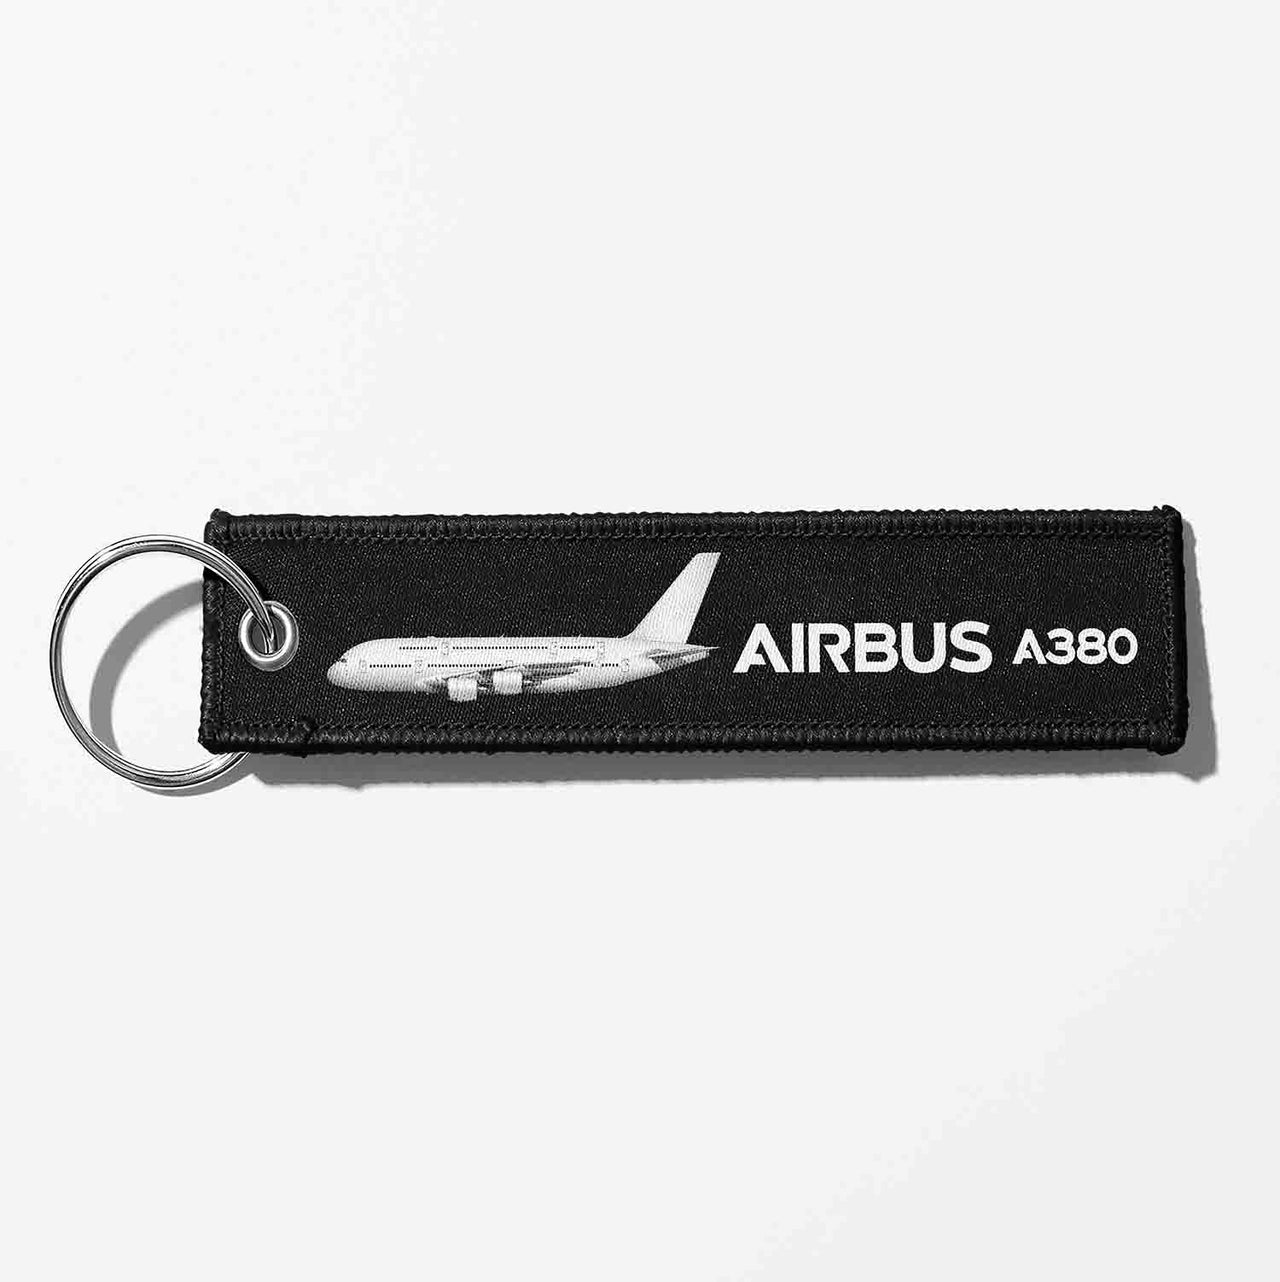 The Airbus A380 Designed Key Chains